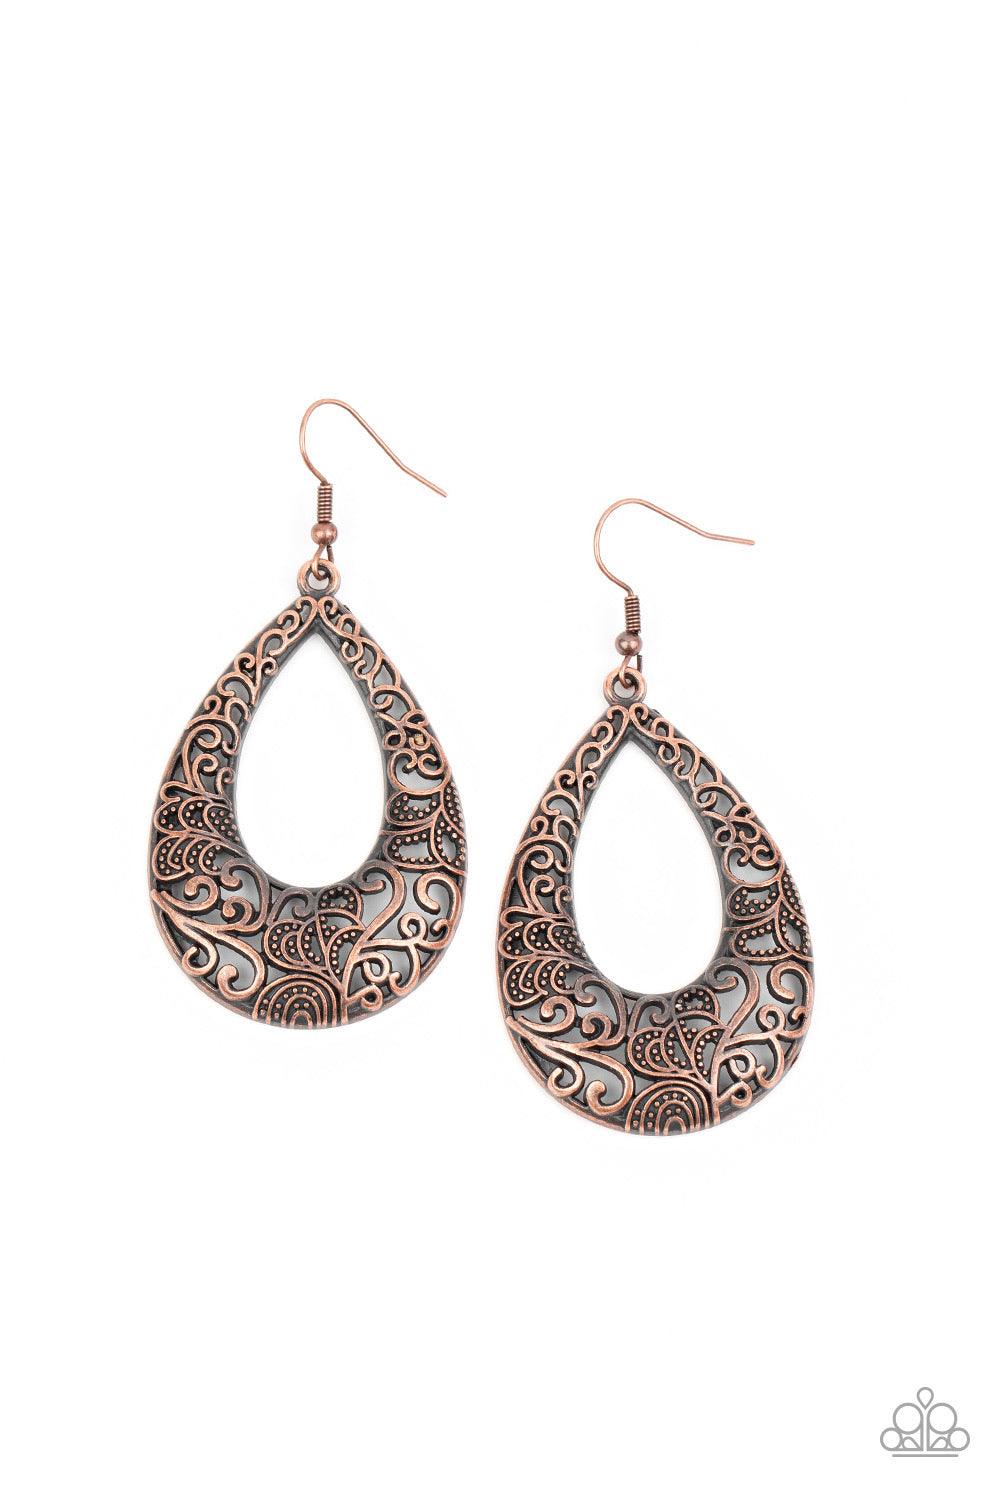 Get Into The GROVE ~Copper - Beautifully Blinged